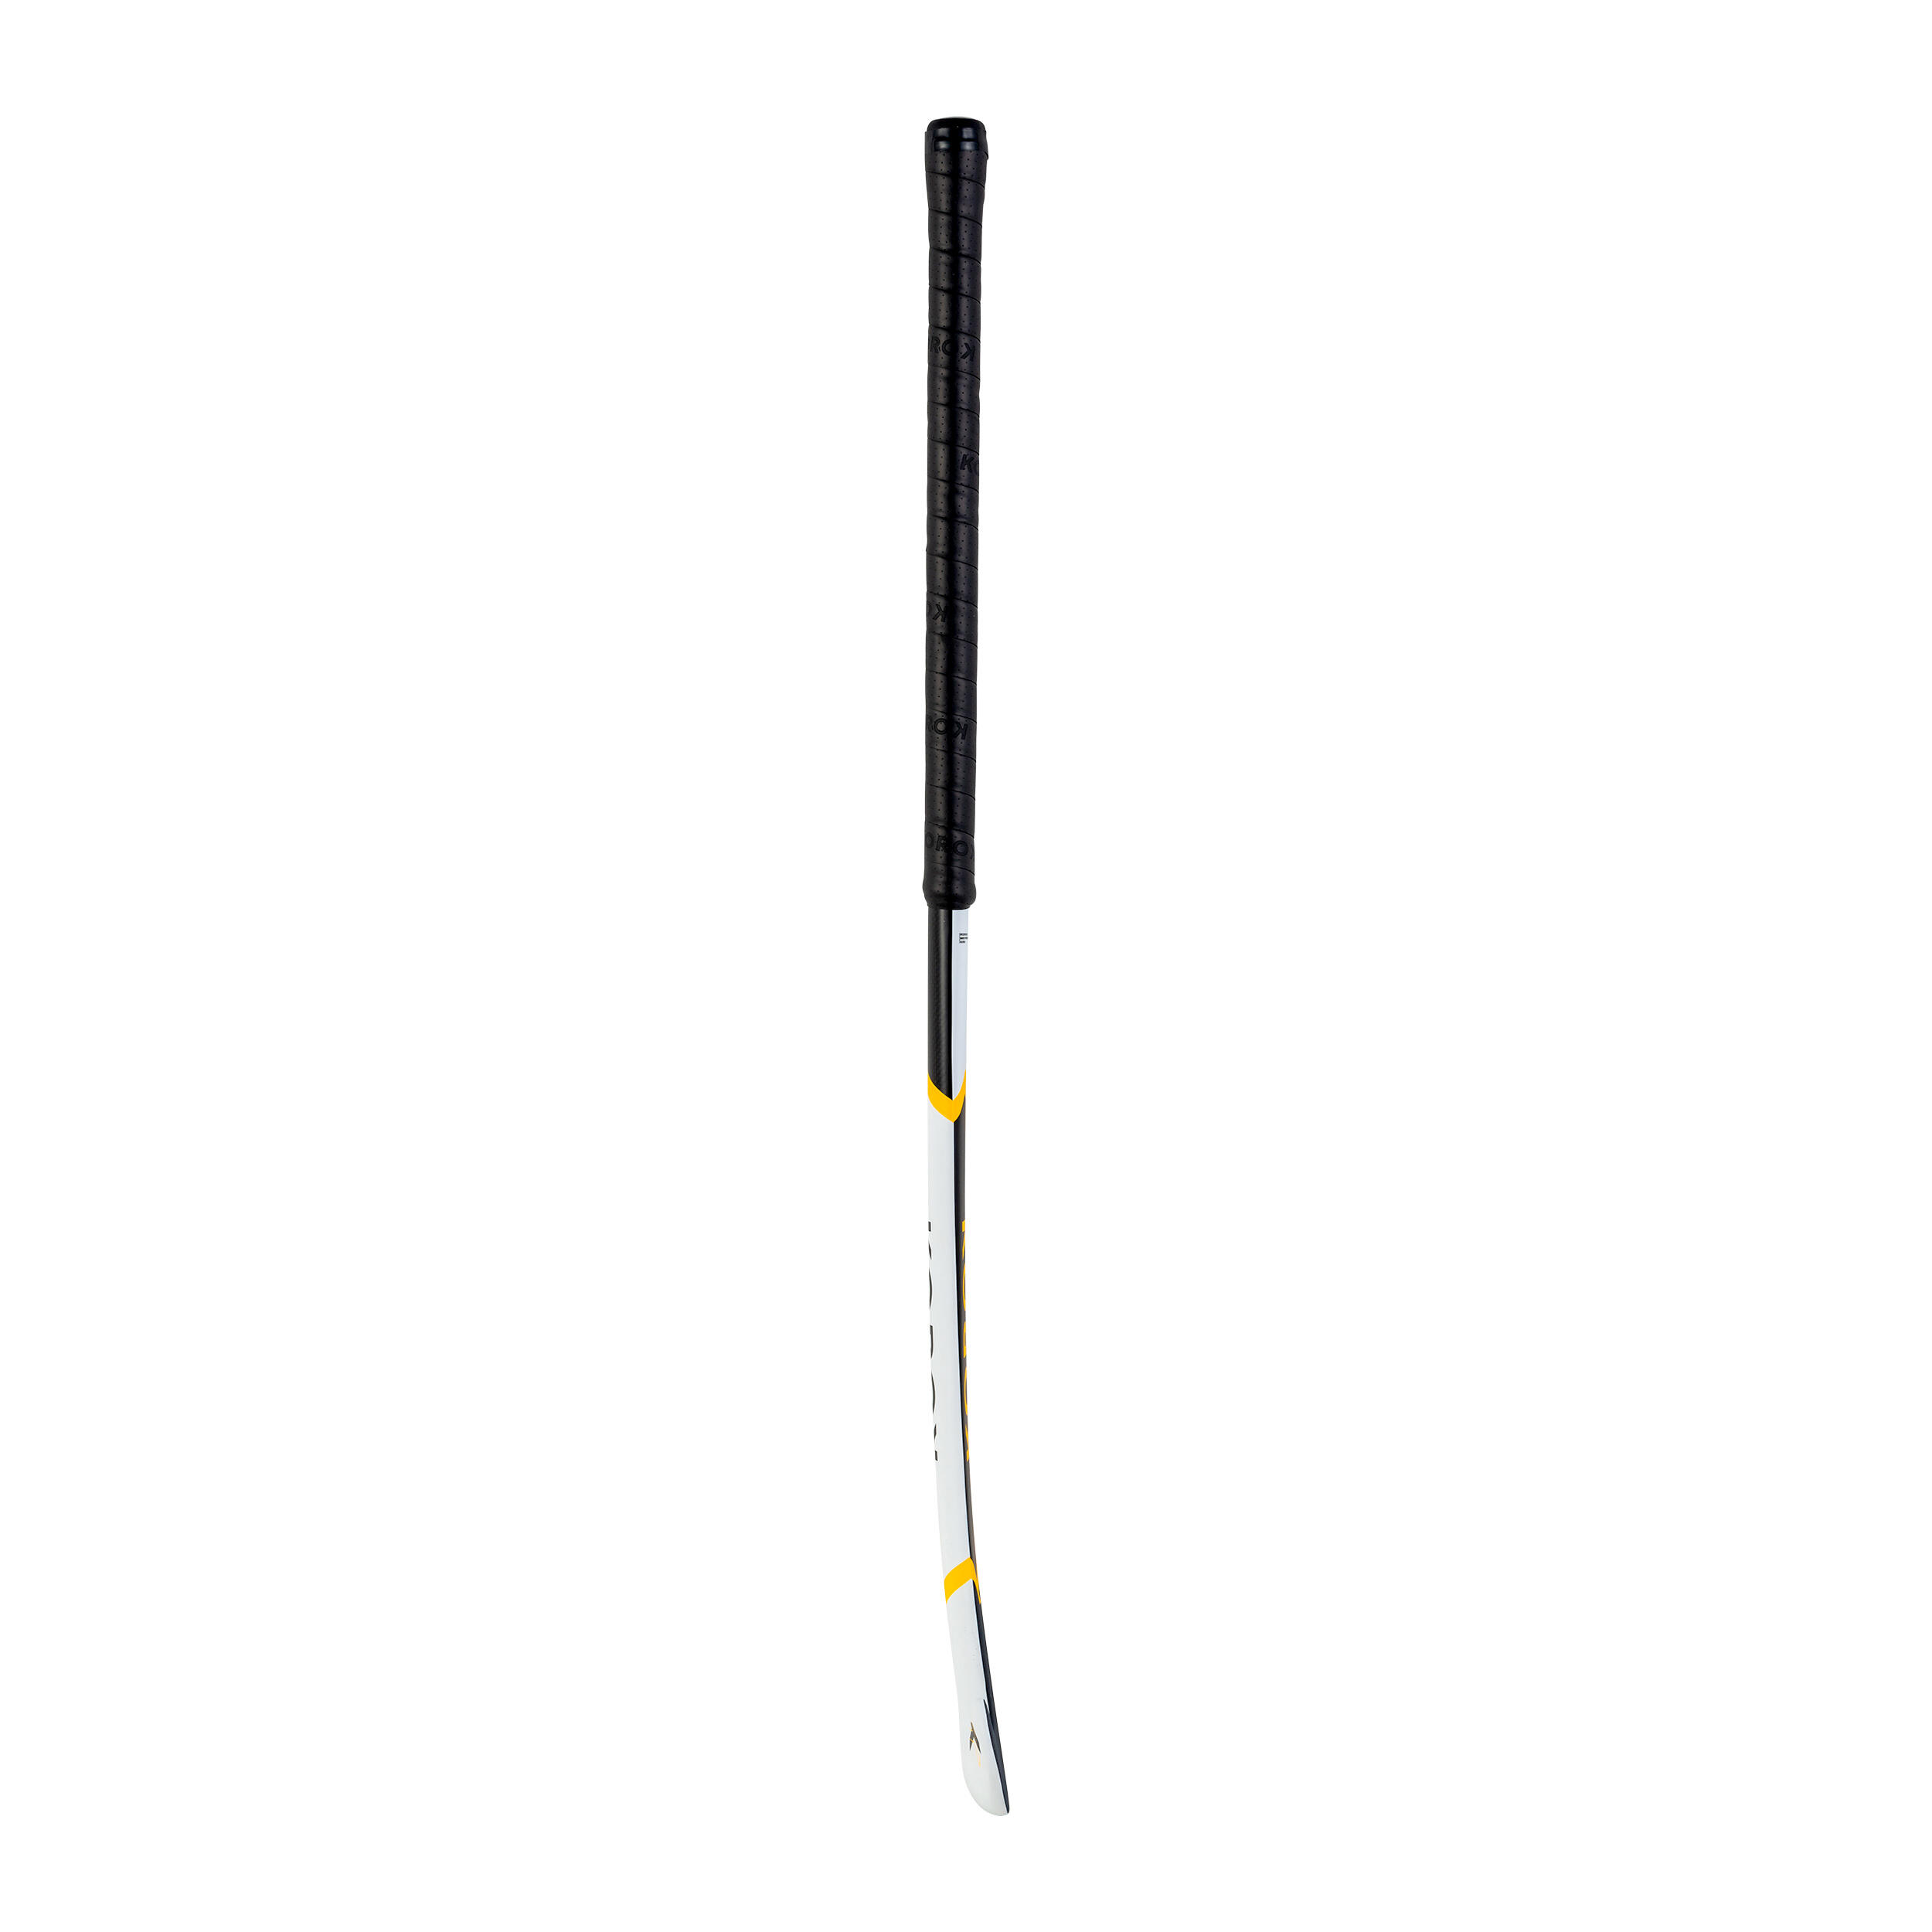 Adult Intermediate 60% Carbon Low Bow Field Hockey Stick FH560 - White/Yellow 9/12